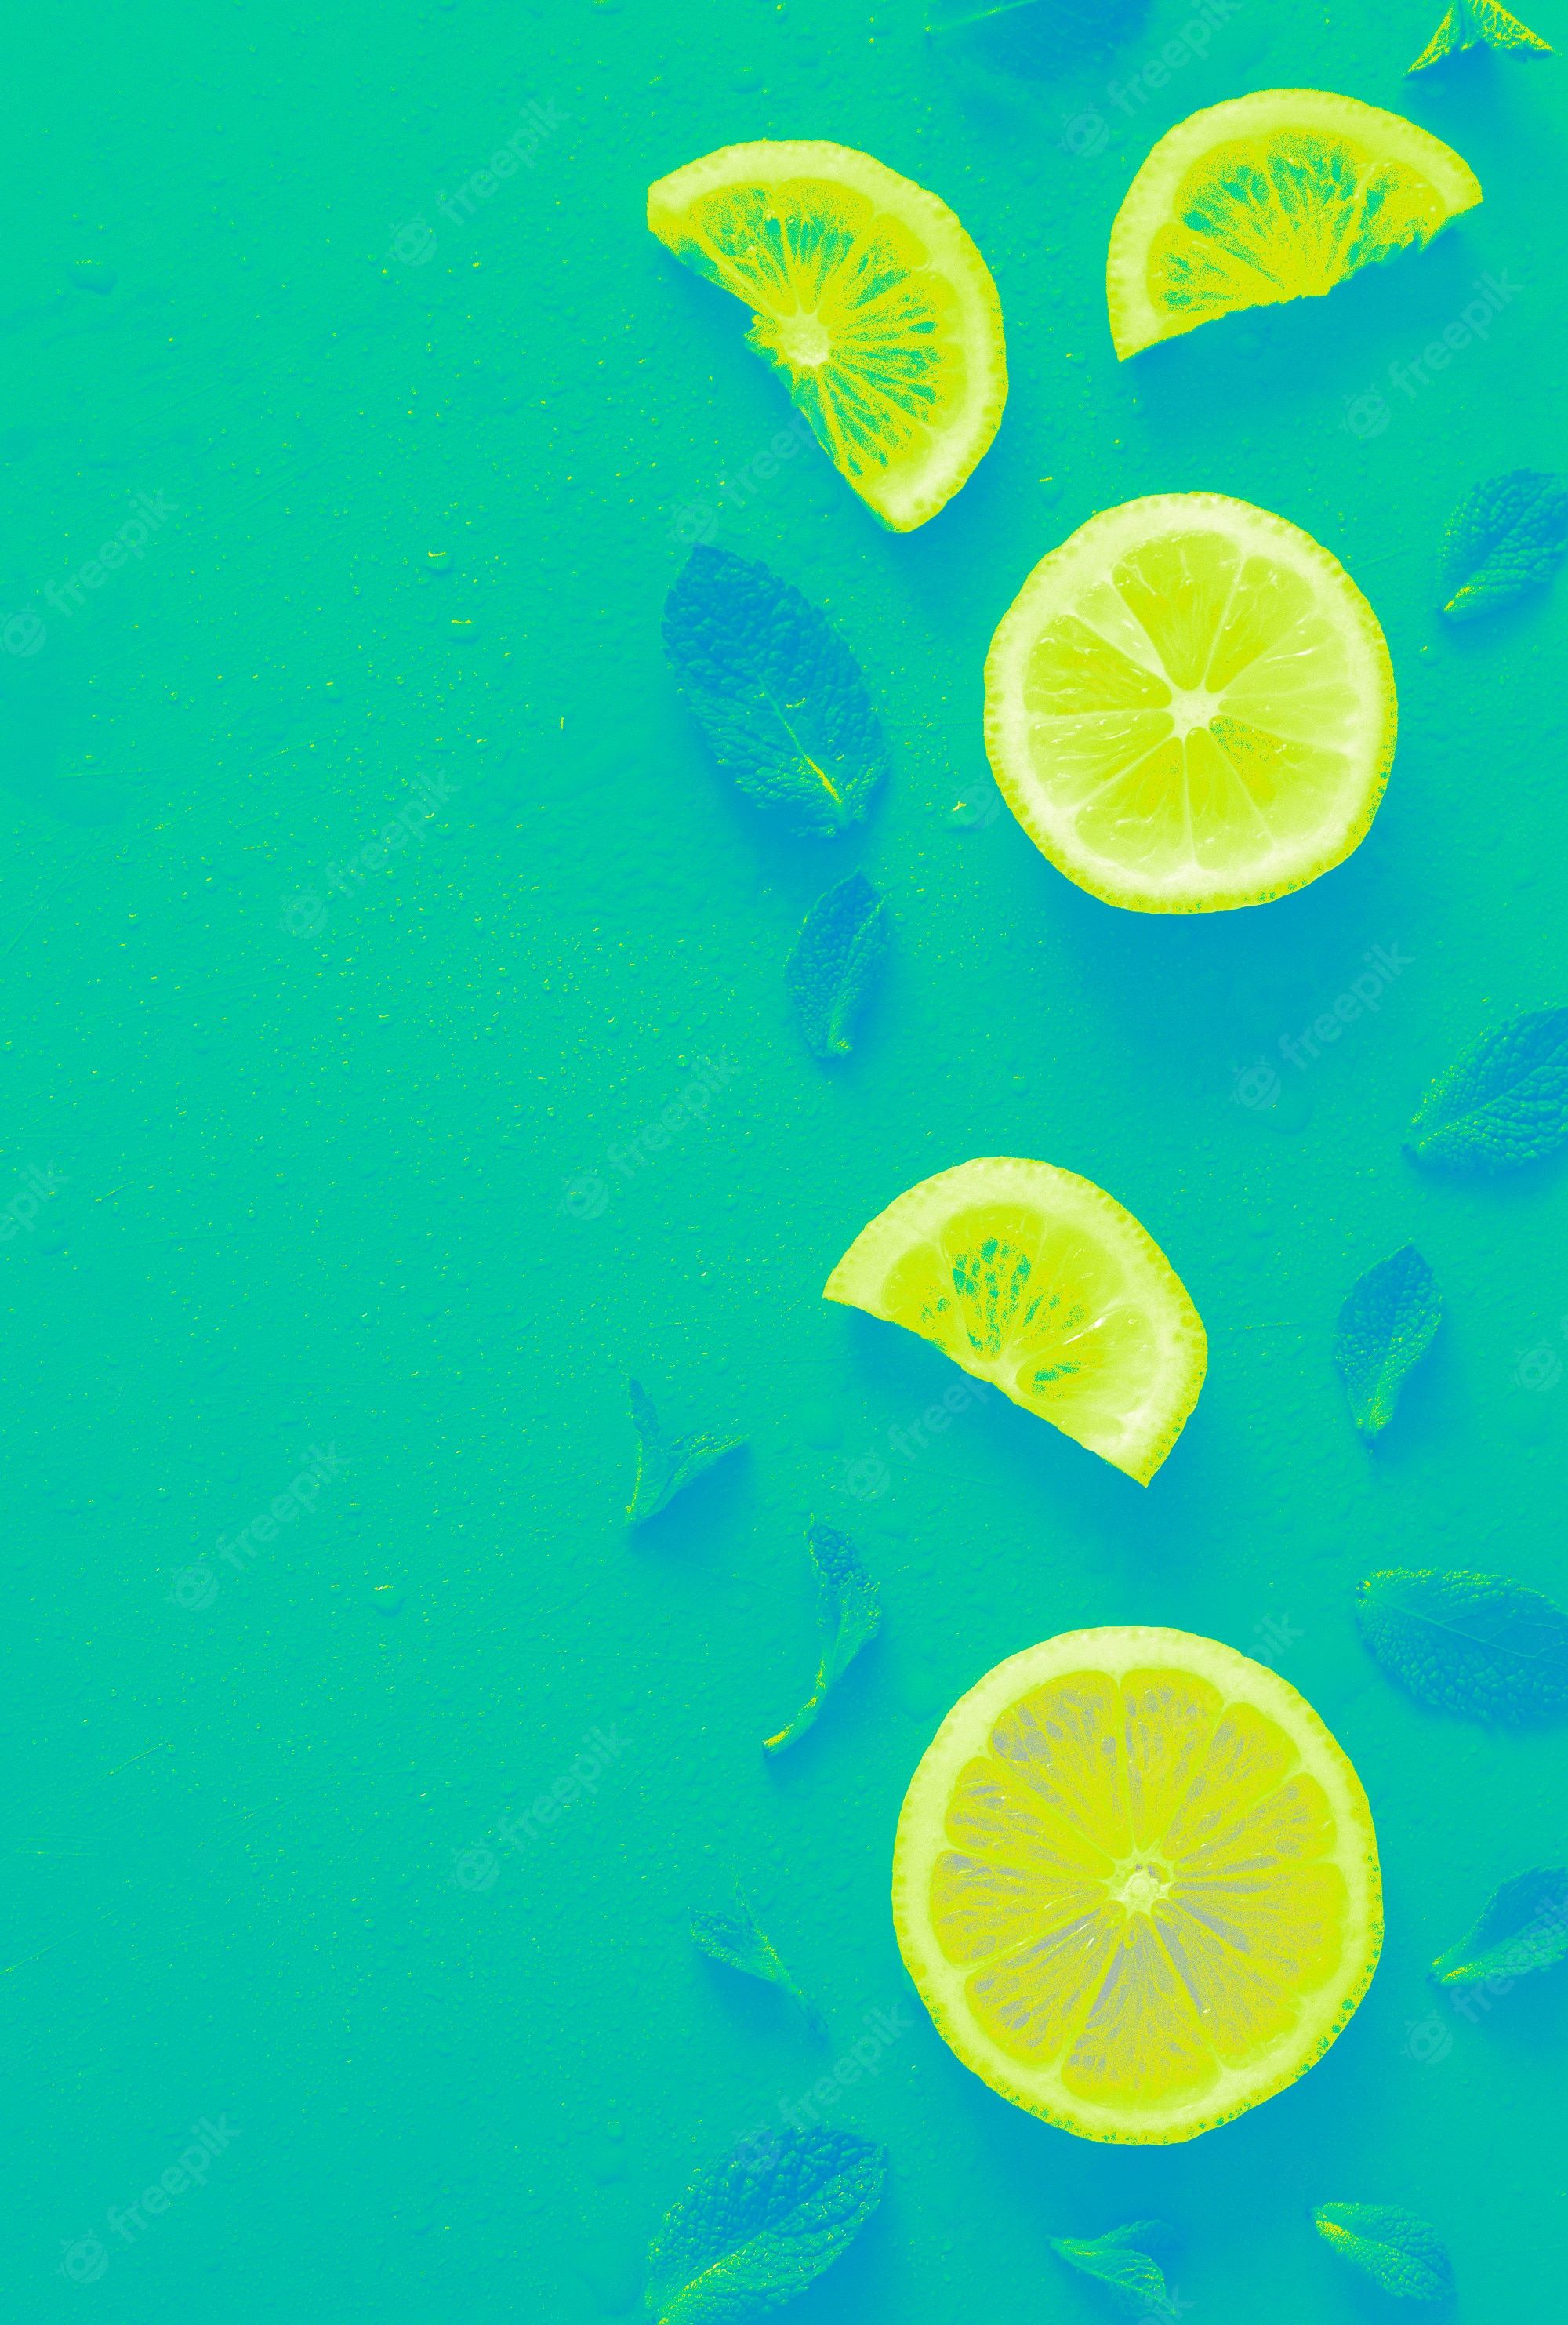 Lime Green Wallpaper Picture